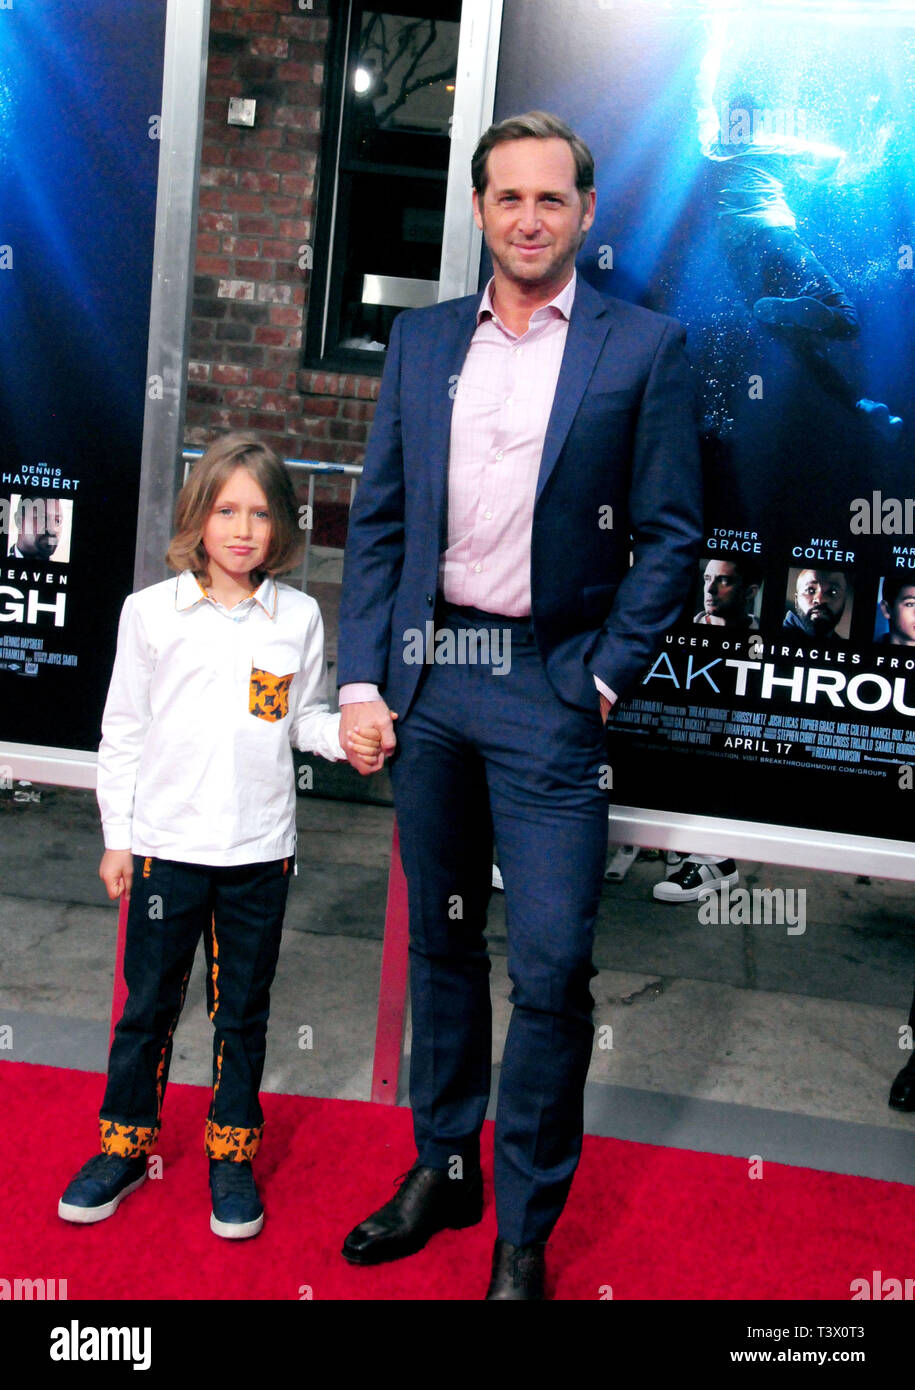 Los Angeles, California, USA 11th April 2019 Actor Josh Lucas and son Noah Rev Maurer attend 20th Century Fox Breakthrough Premiere on April 11, 2019 at Westwood Village Regency Theatre in Los Angeles, California. Photo by Barry King/Alamy Live News Stock Photo